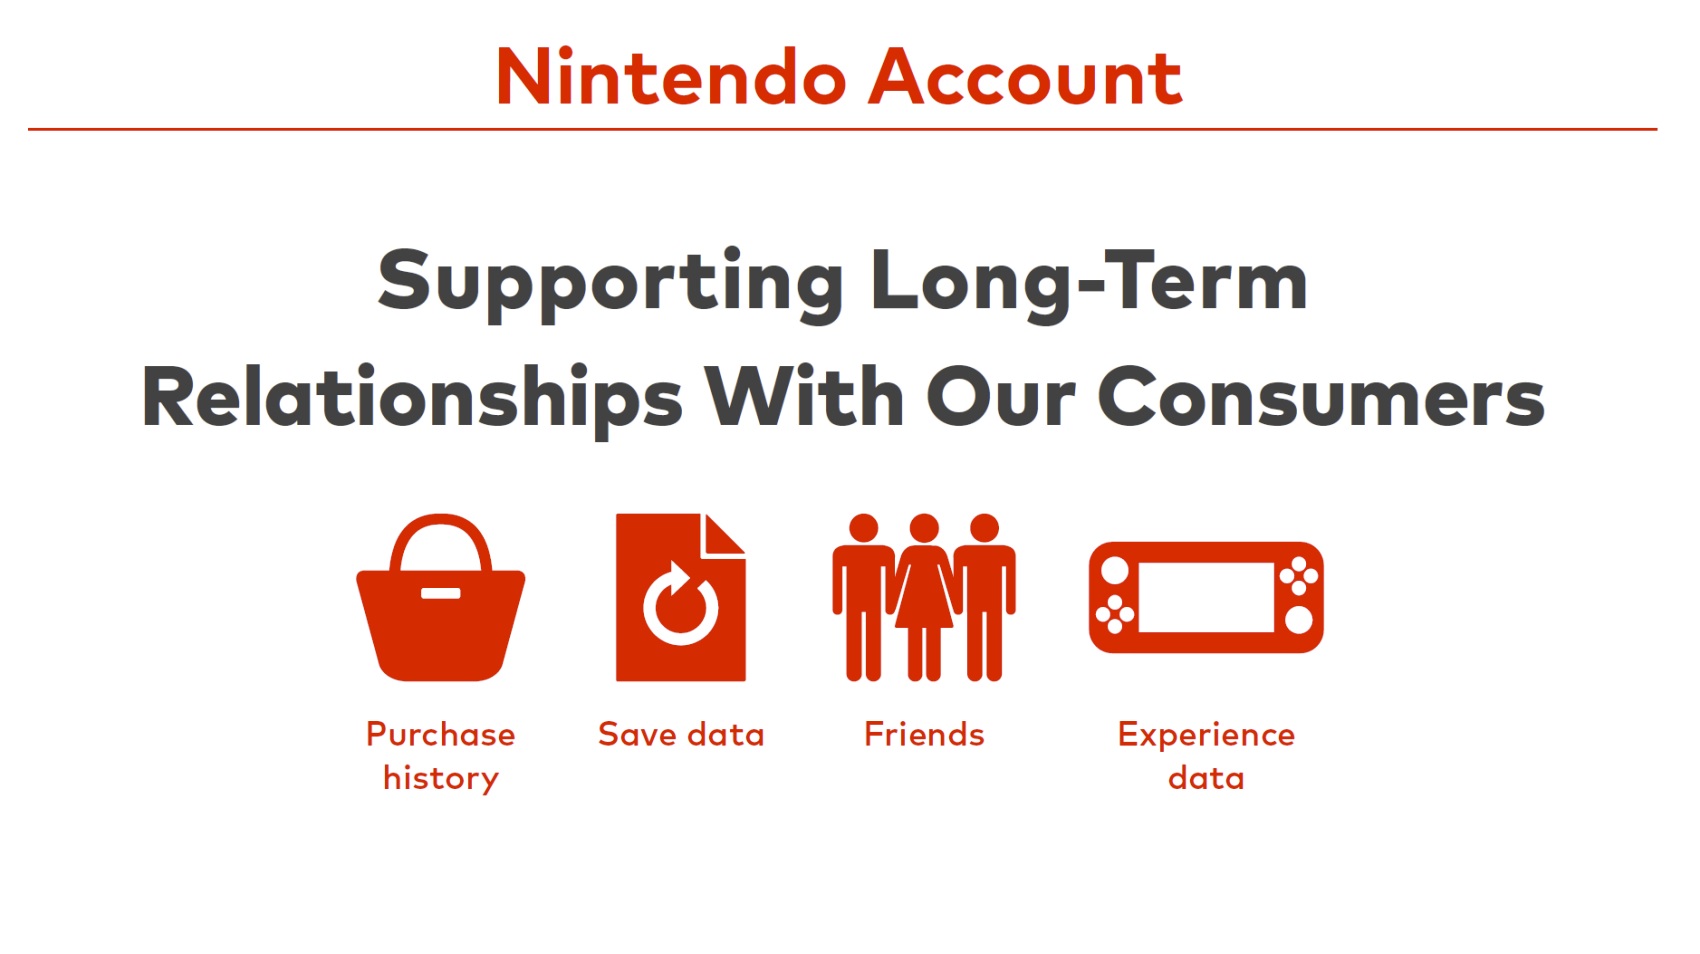 Nintendo's 330M+ User Accounts Will Be Foundation Of Lasting Relationship  With Consumers